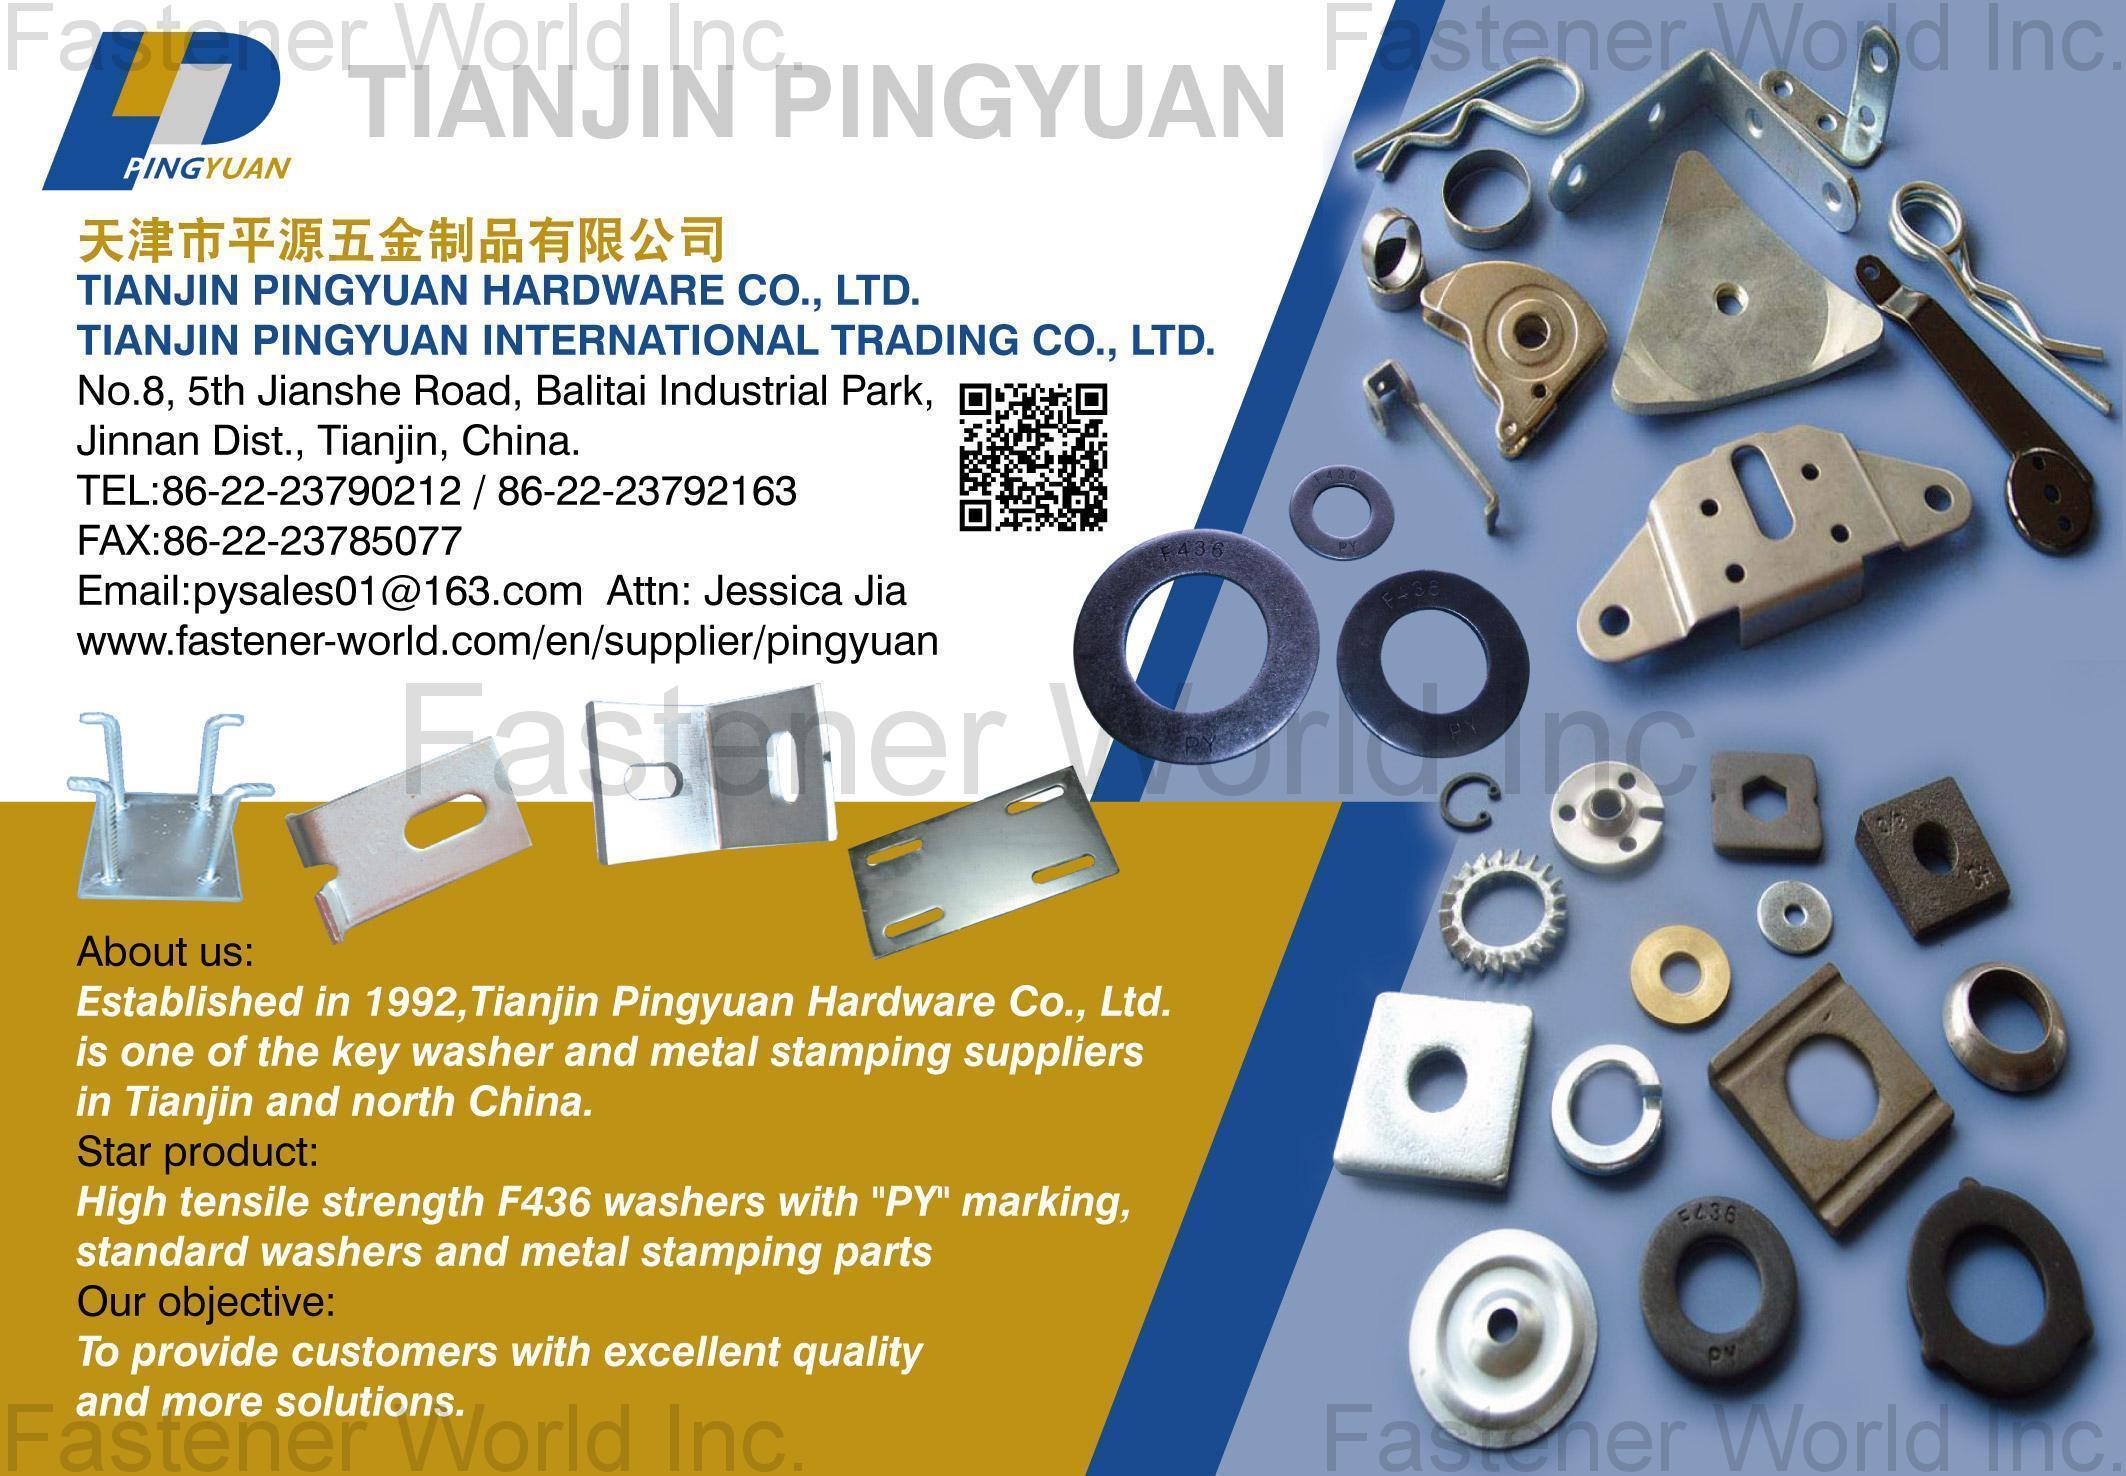 Tianjin Pingyuan Hardware Co., Ltd. , Flat washer and stamped parts, DIN, USS, SAE, BS, NFE, AS, ISO. ANSI, ASTM F436/F959, and some Non-standard made to order, Carbon steel, Stainless Steel, Alloy Steel ect, PLAIN, ZINC PLATED, Black,Painting etc, High tensile strength F436 washers with PY marking